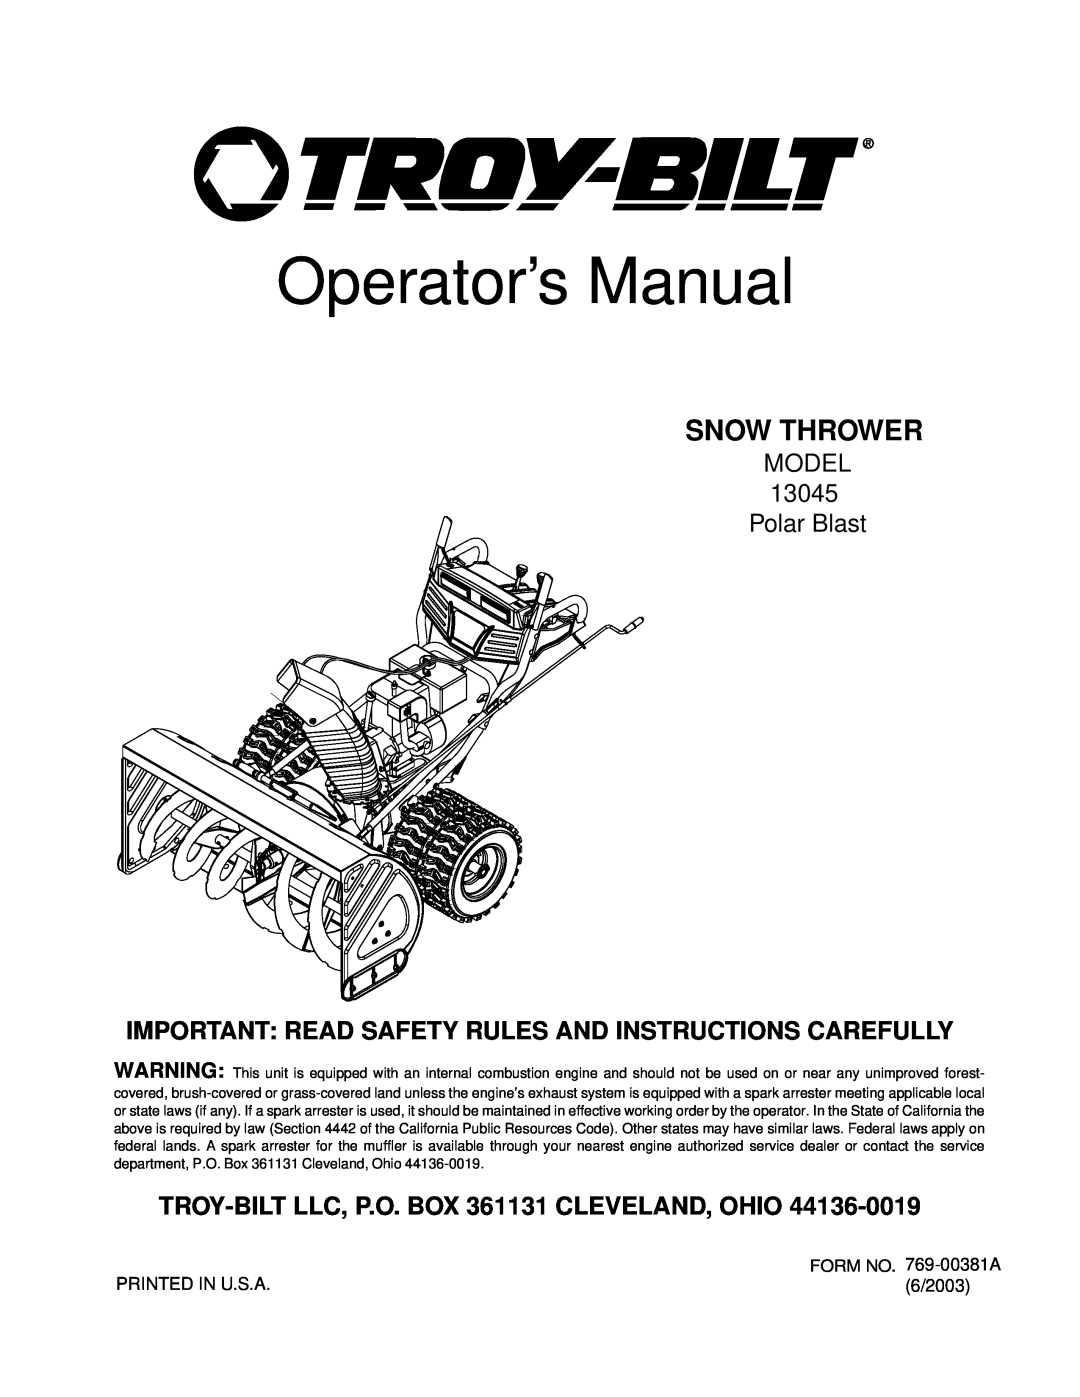 Troy-Bilt 13045 manual Operator’s Manual, Snow Thrower, Important Read Safety Rules And Instructions Carefully 